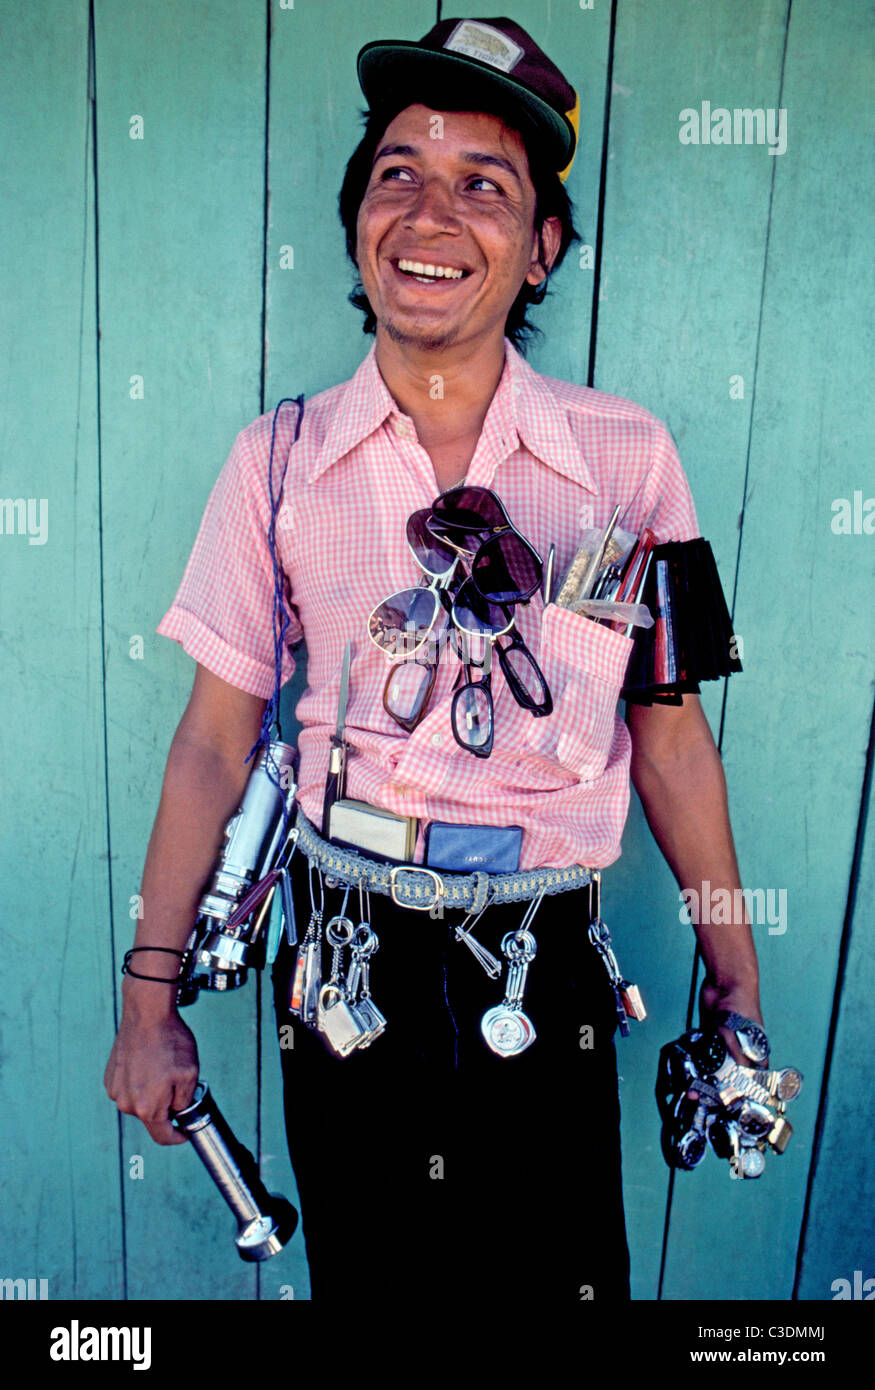 Eyeglasses, watches, flashlights and other items decorate this smiling street vendor in Coca City, an Amazon rainforest town in Ecuador, South America. Stock Photo